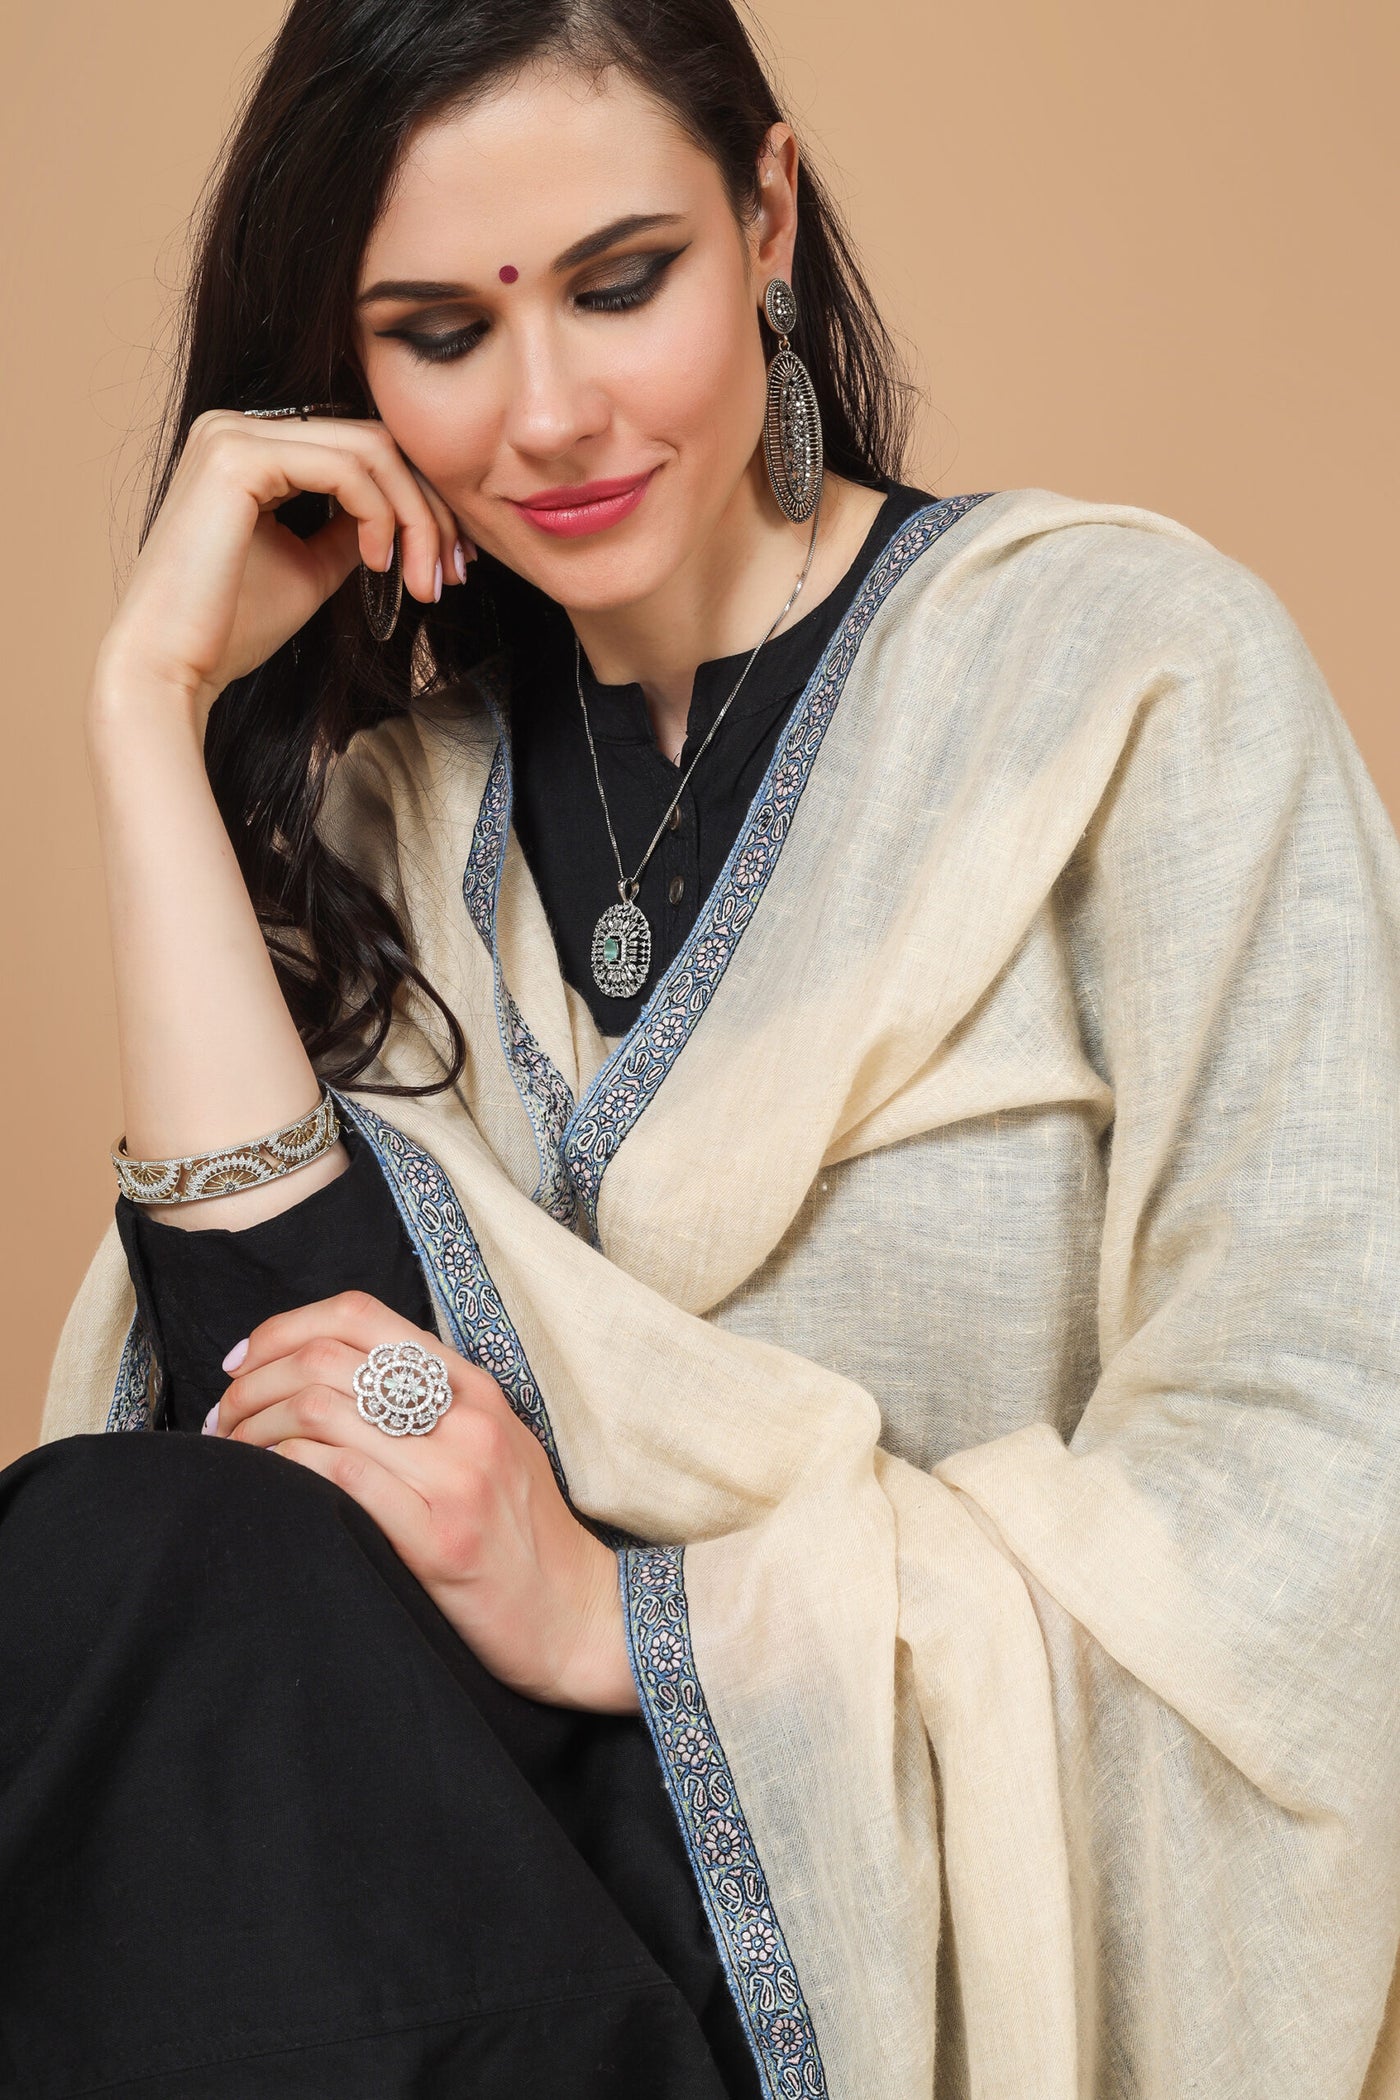 Looking for an elegant and high-quality Pashmina shawl? Check out our selection of handmade Sozni embroidered Pashmina shawls crafted and passionately woven, this ravishing Off White Pashmina Shawl has been ornated with a beautiful Sozni border, traditionally called the Hashidaar pattern. 